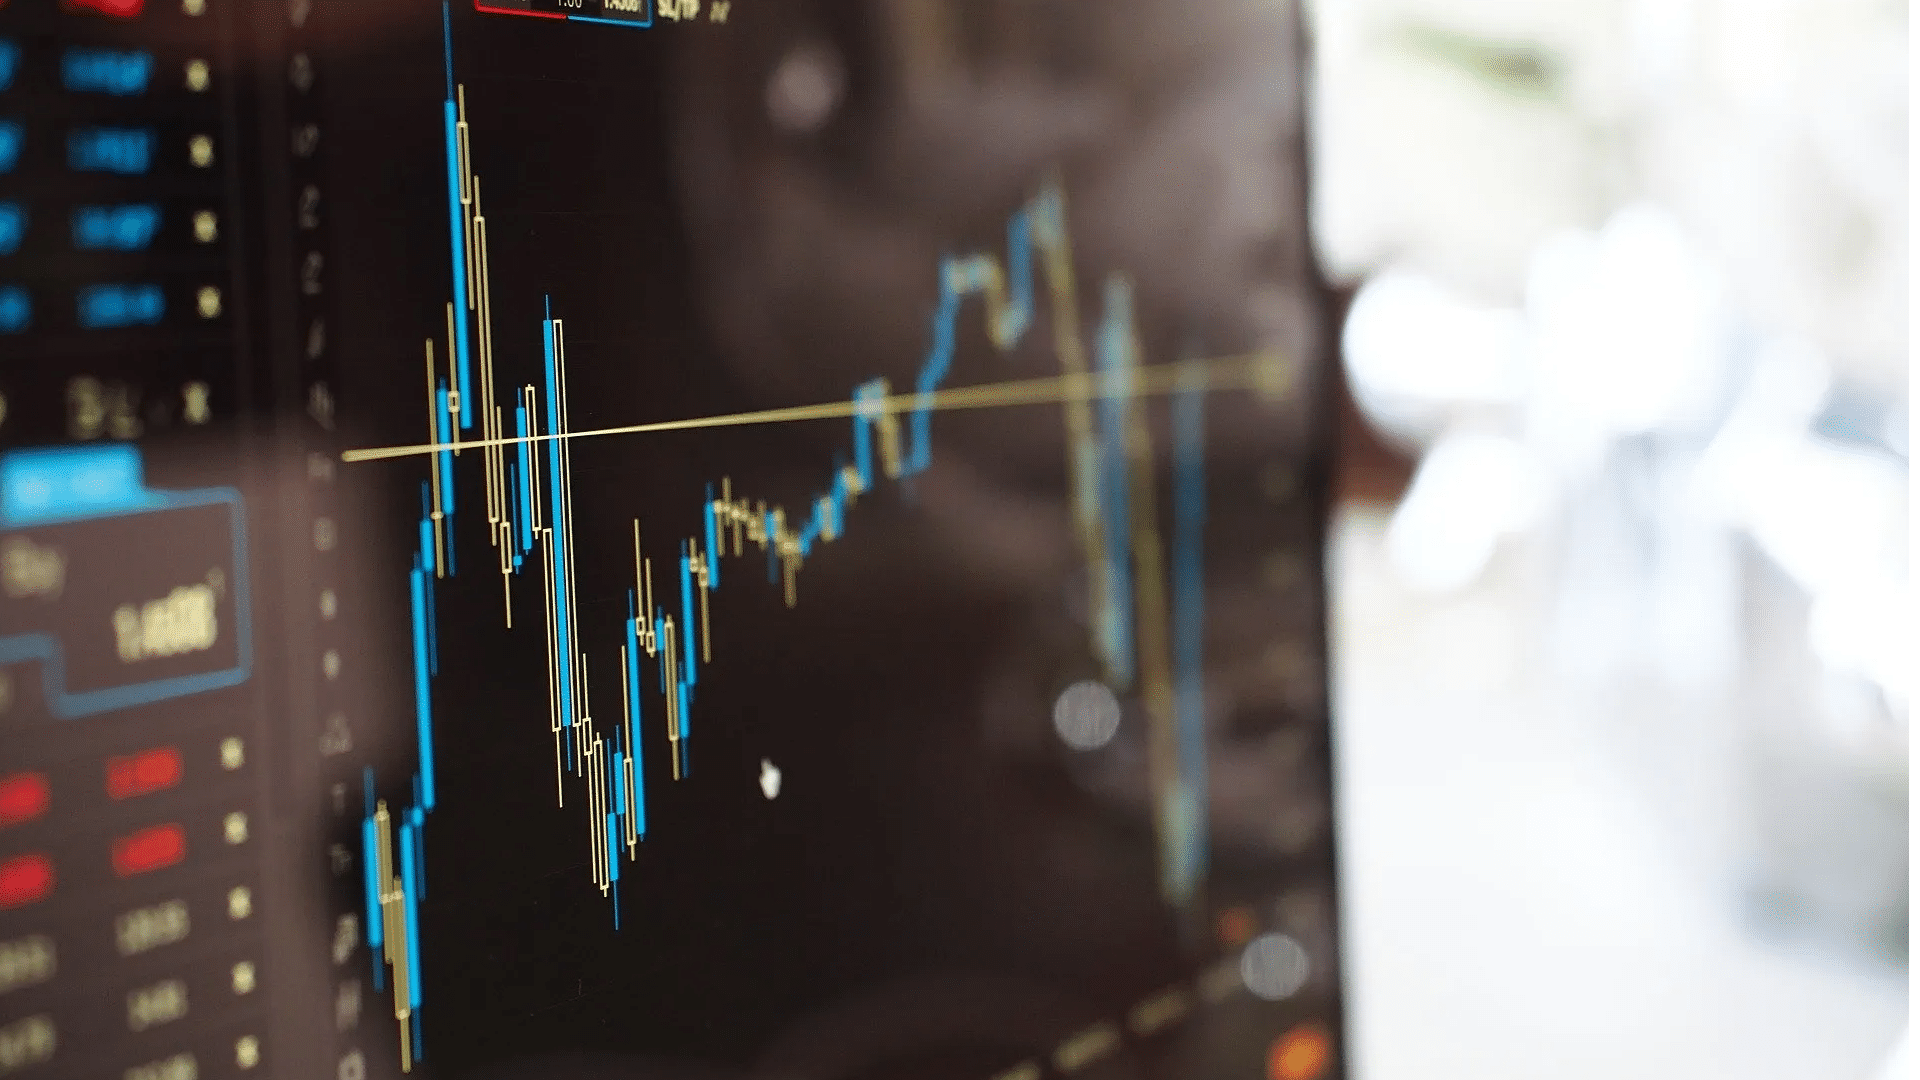 Wipro, Vedanta, Ambuja Cements and other stocks that moved most on July 20